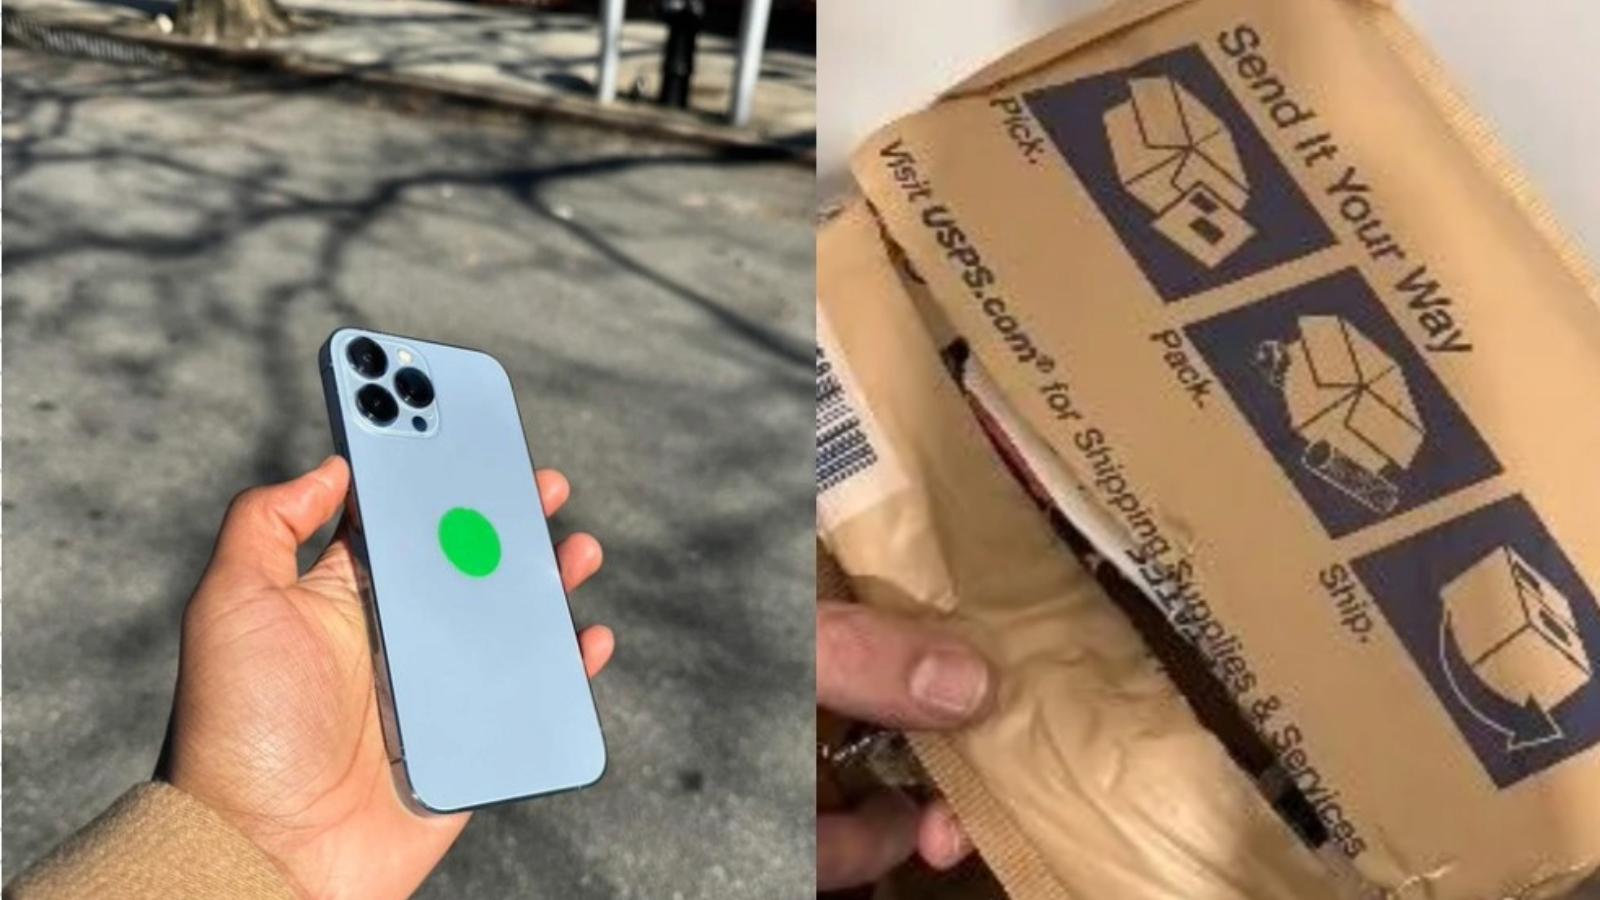 Image showing an iPhone alongside a USPS package